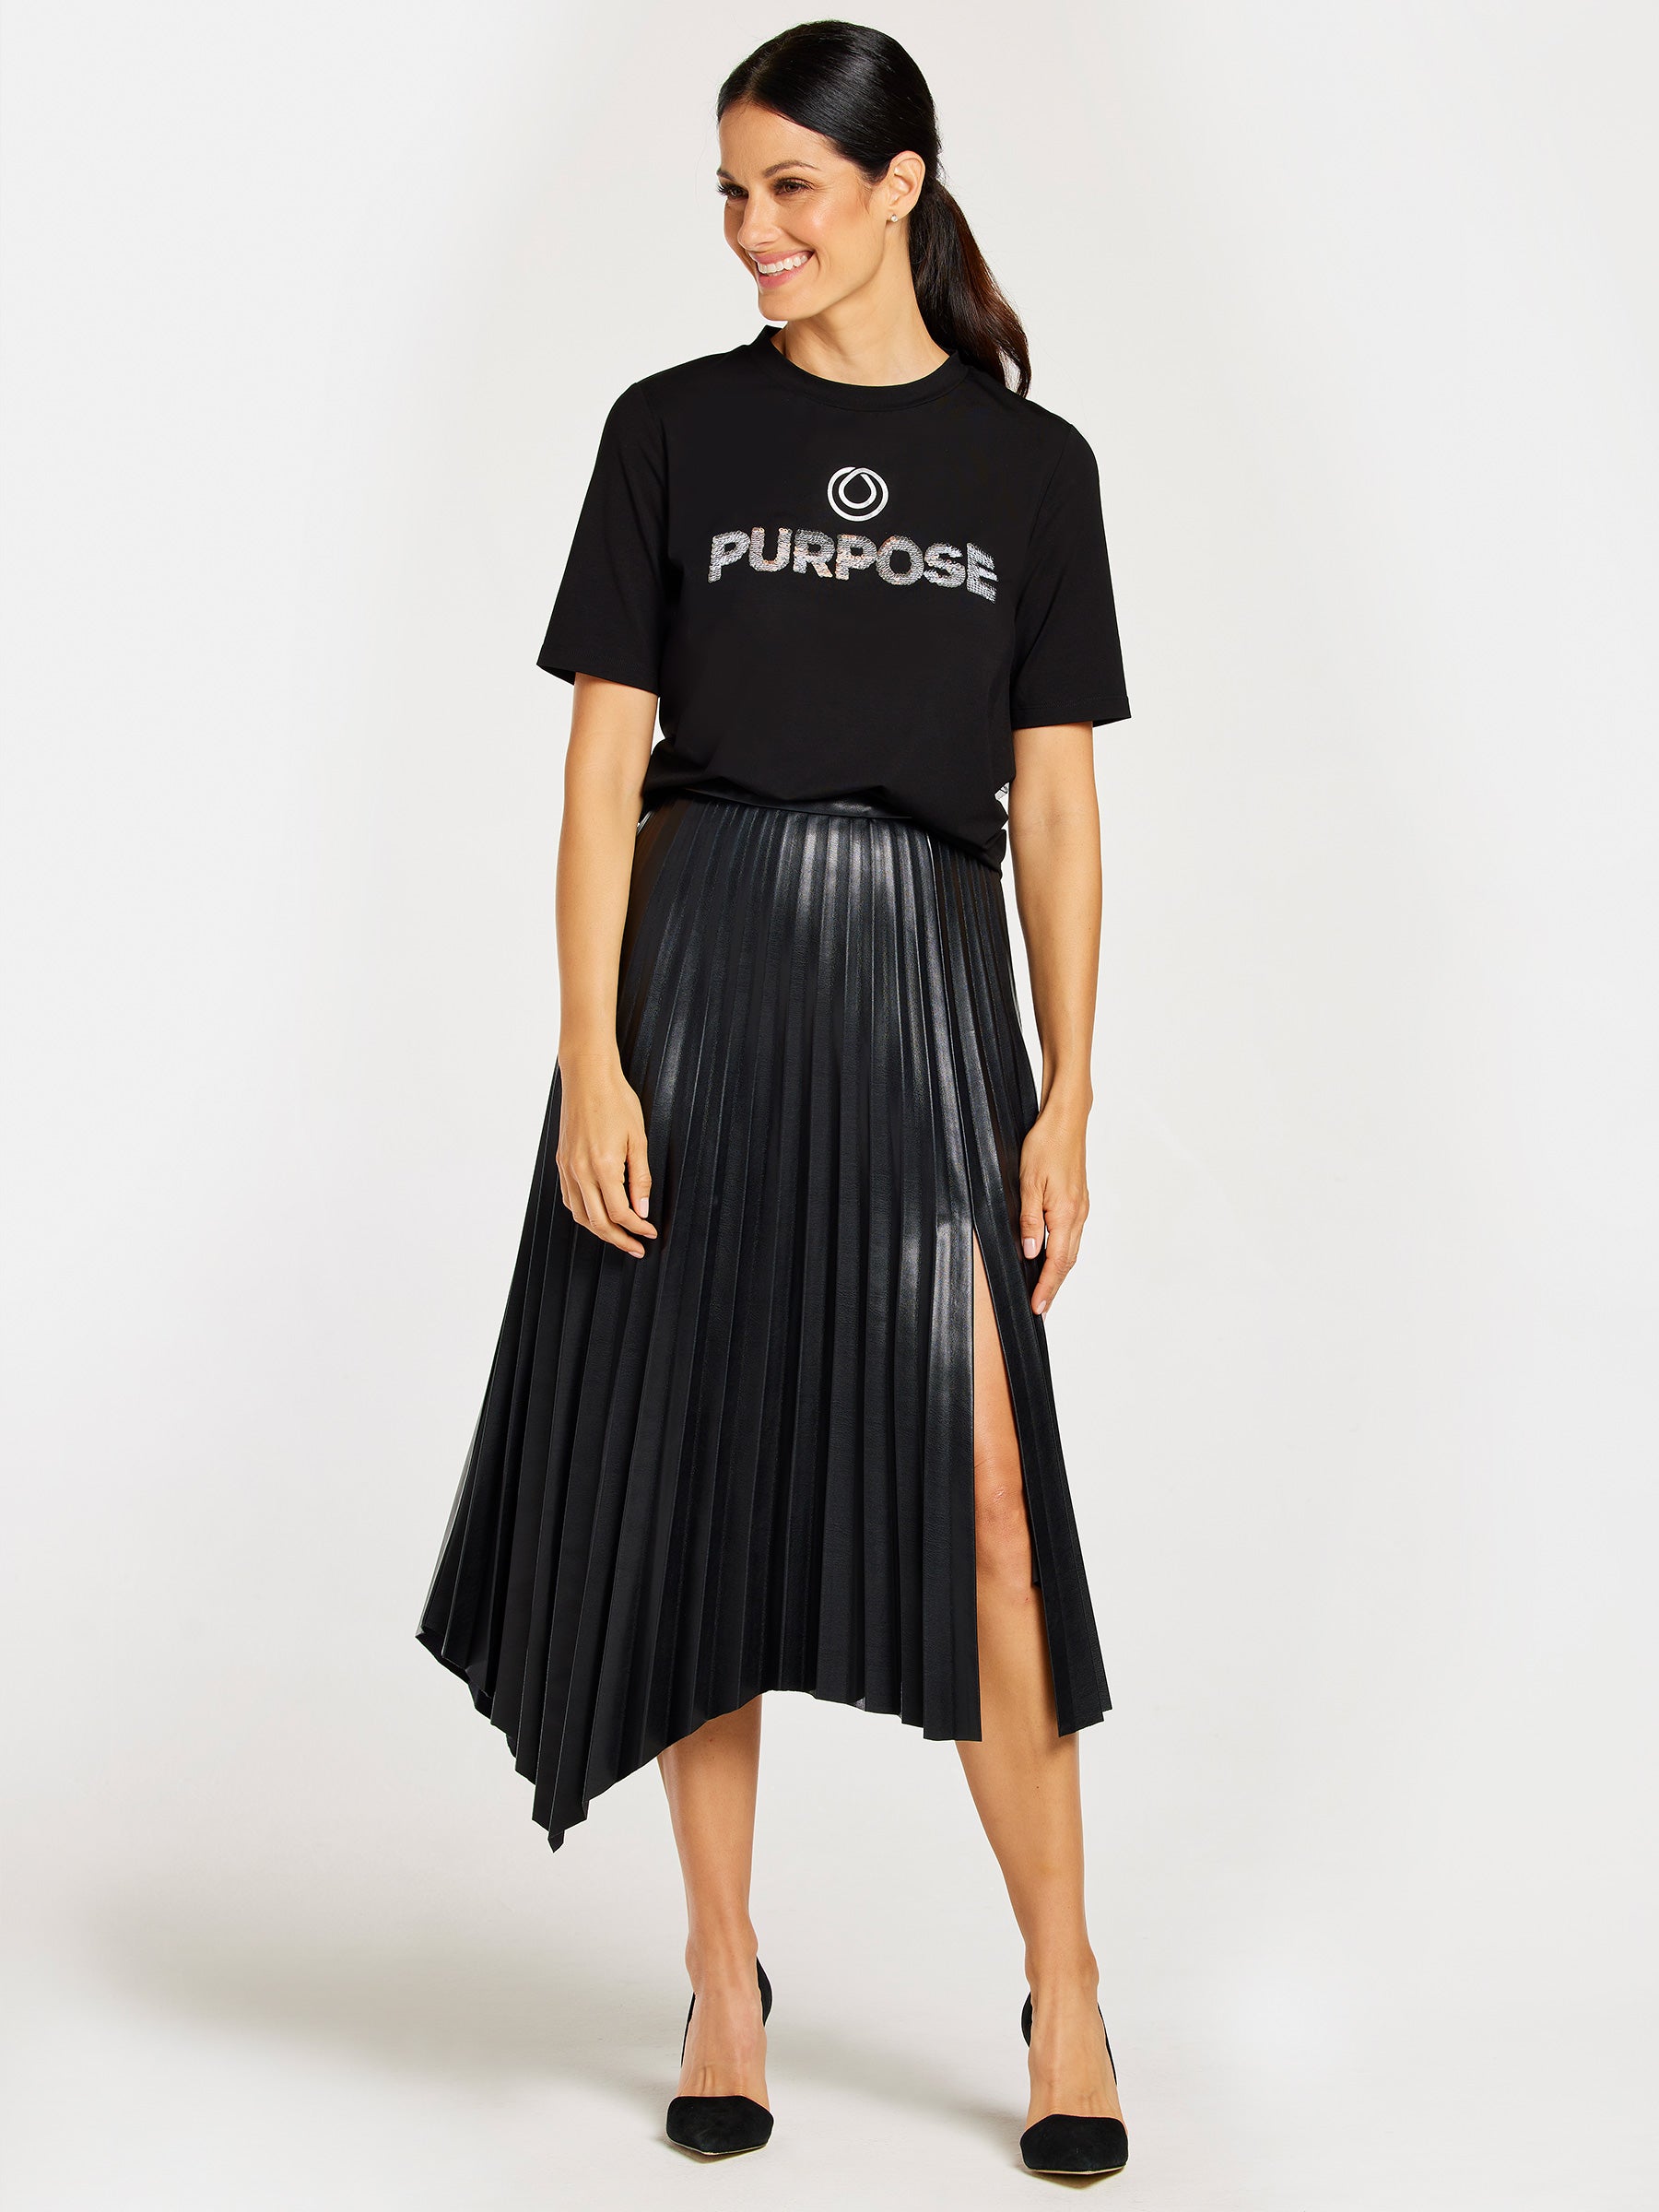 MONAT  Purpose Tee with Tulle Back